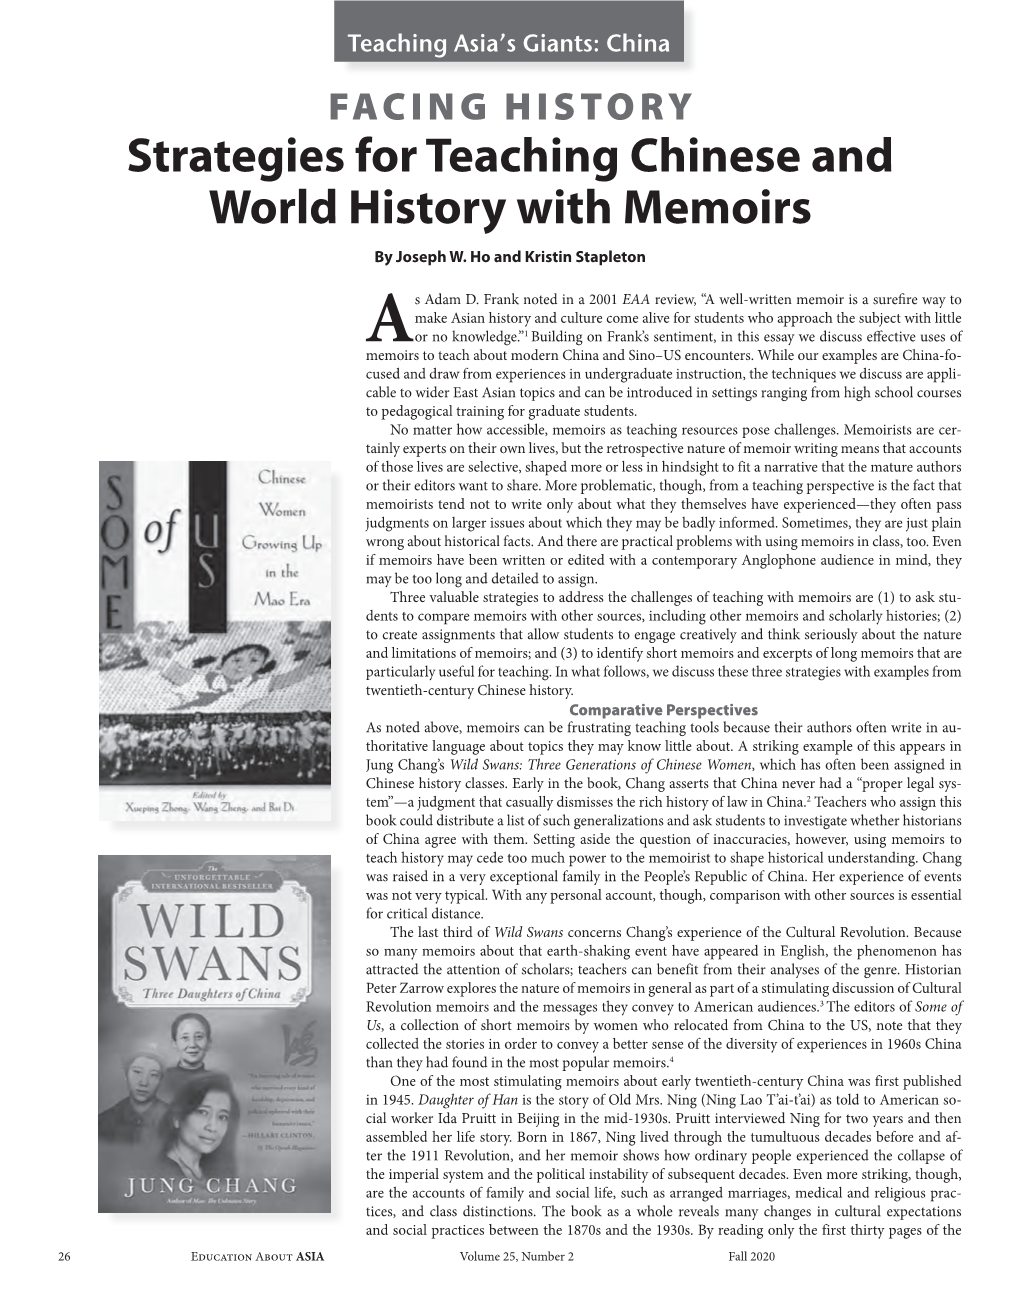 Strategies for Teaching Chinese and World History with Memoirs by Joseph W